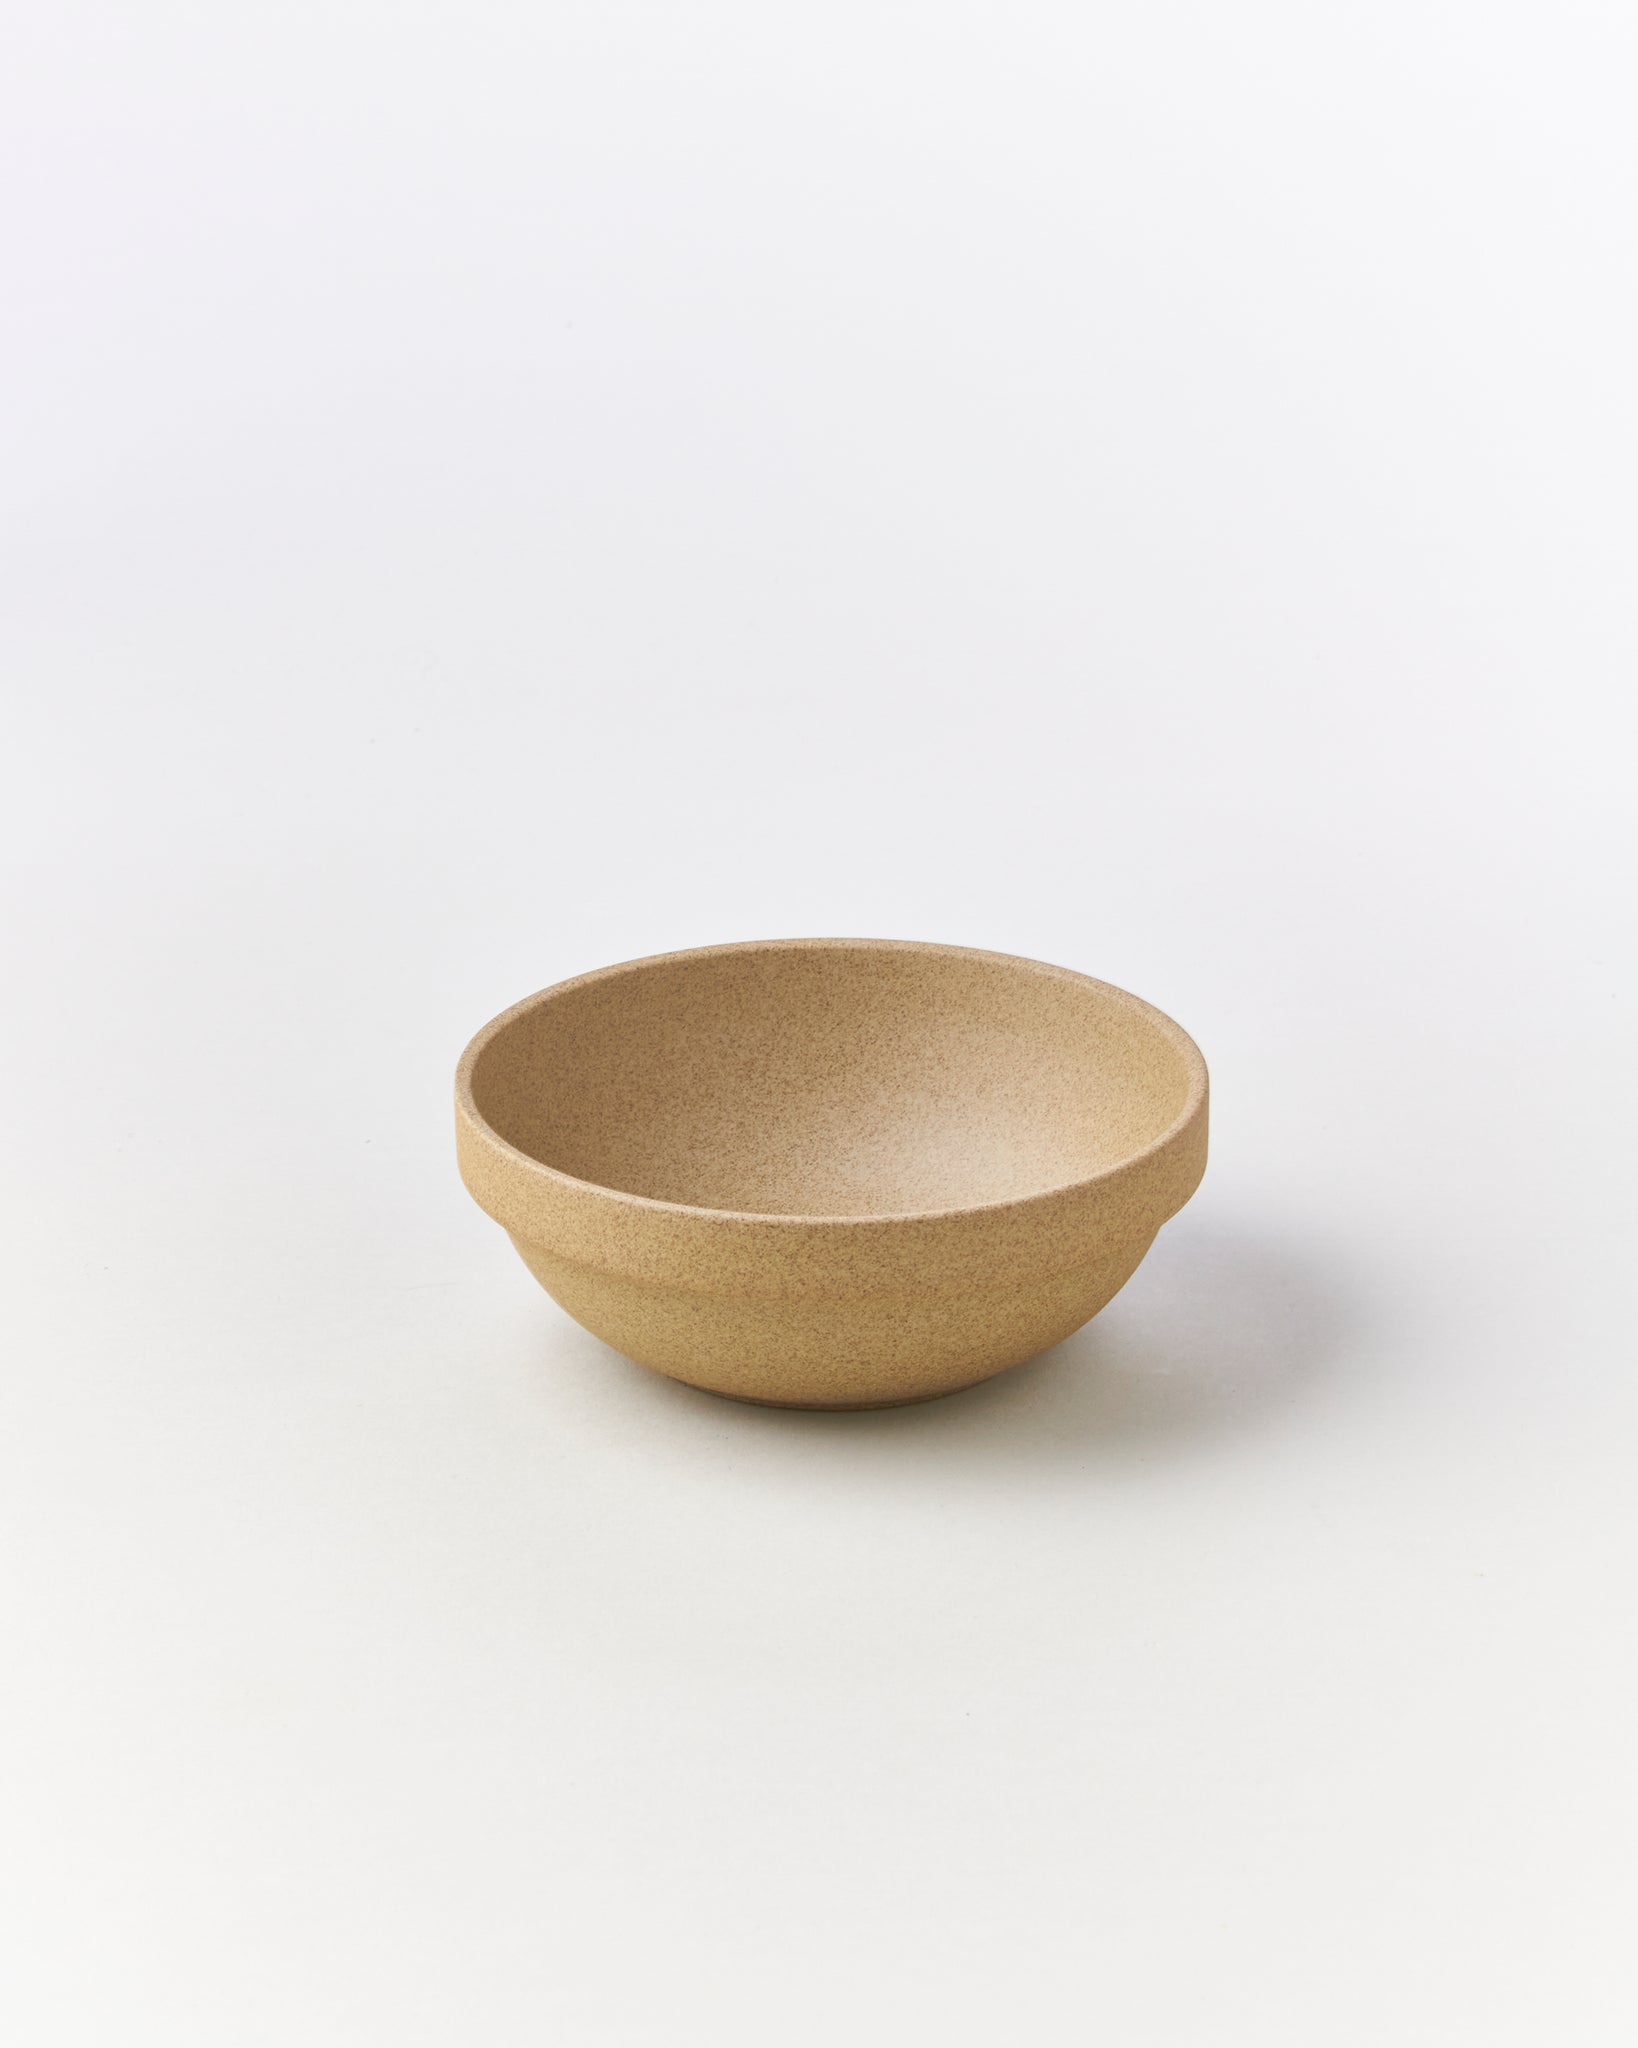 Hasami 5 5/8-inch Round Bowl in Natural